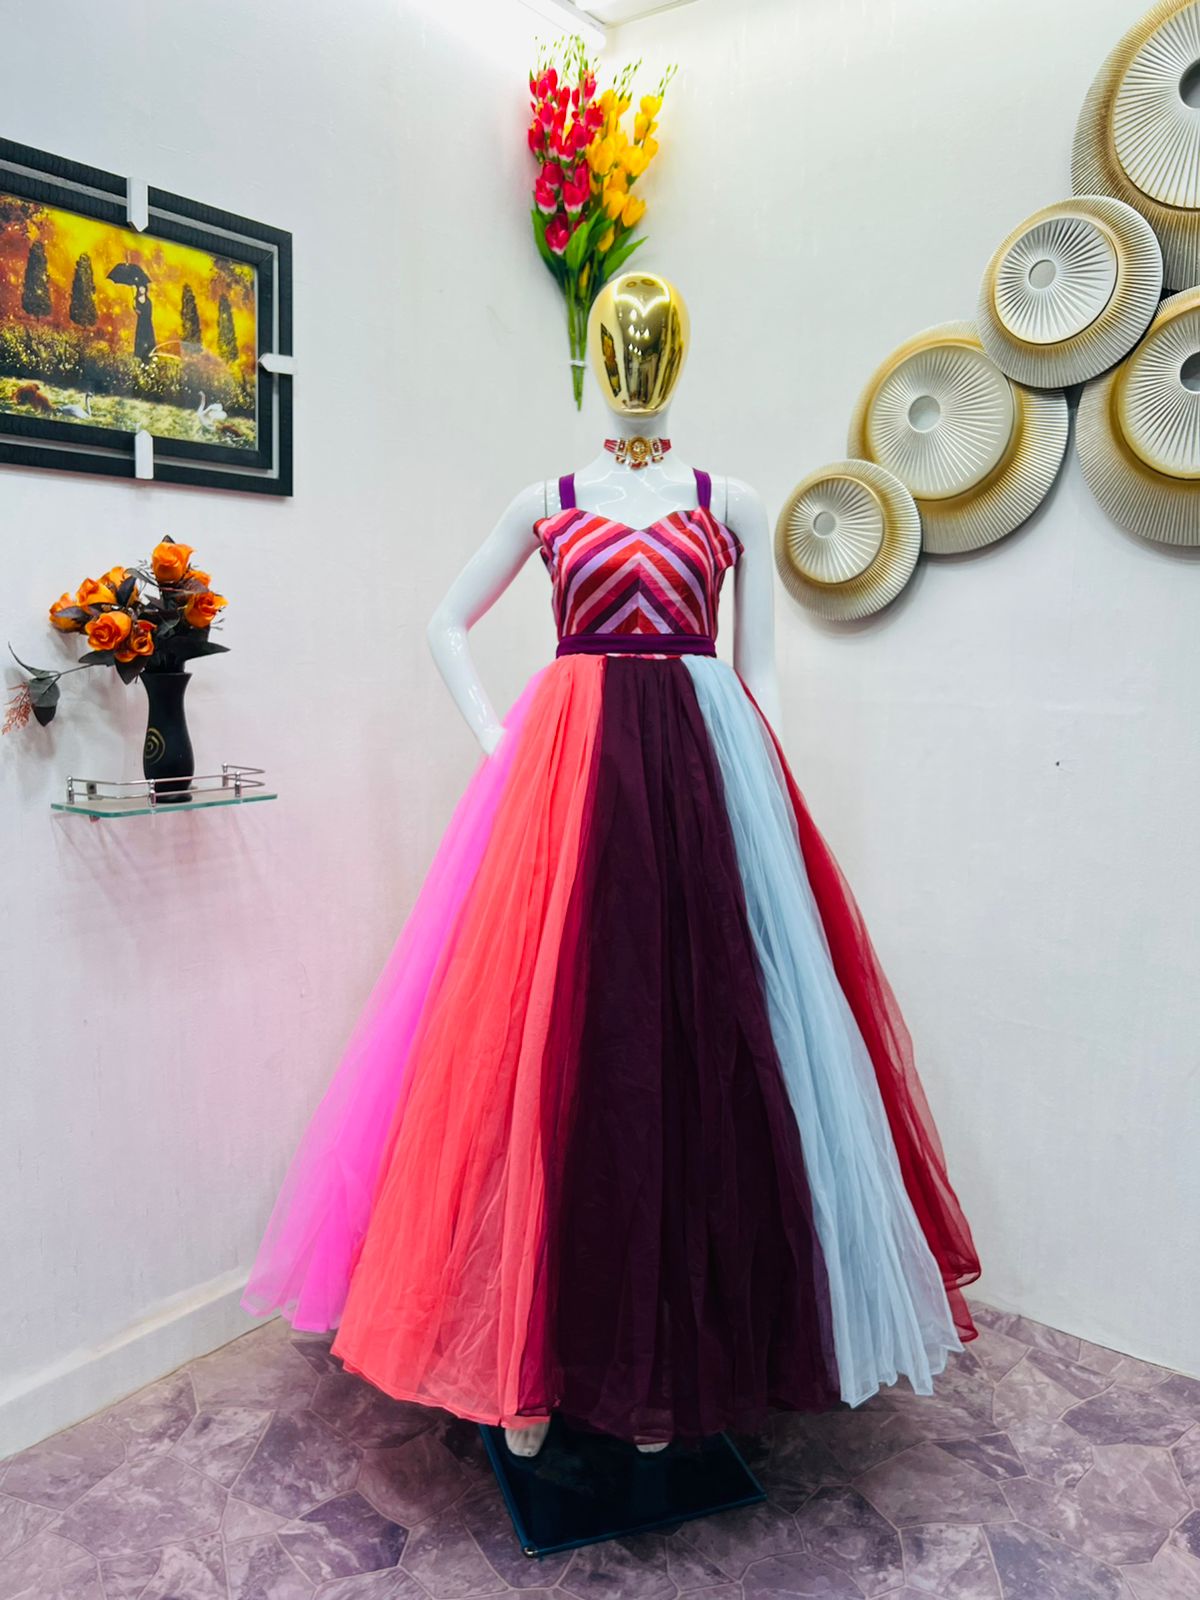 Buy Sui Generis Multi-colored Dress Fairy Princess With Ruffled Tiered  Skirt Tulle off the Shoulder Ballgown Wedding/prom Dress Various Styles  Online in India - Etsy